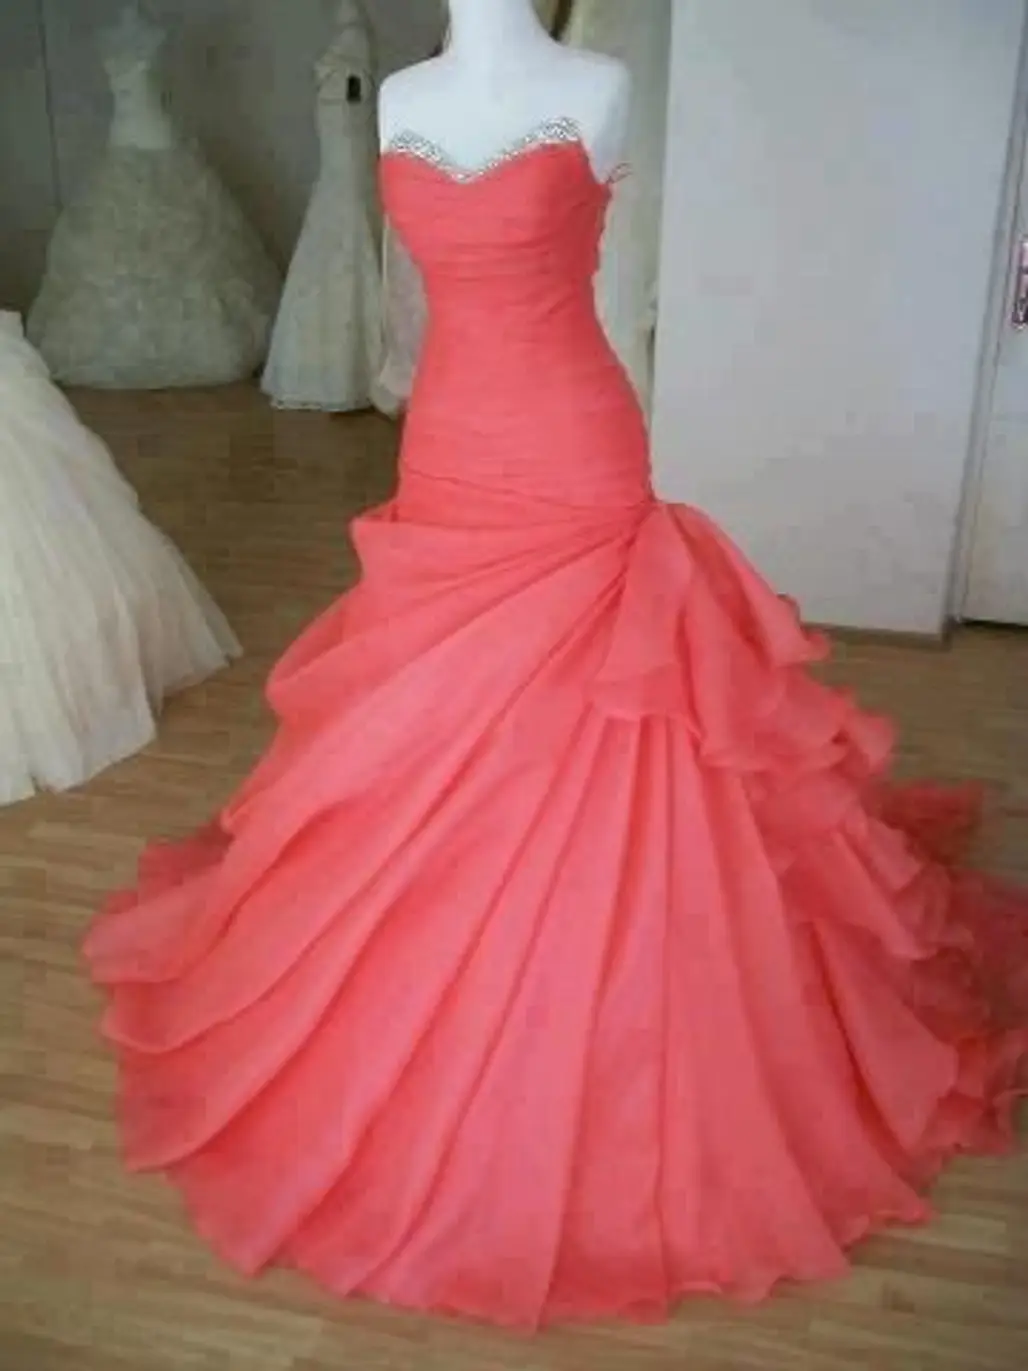 dress,wedding dress,clothing,pink,gown,